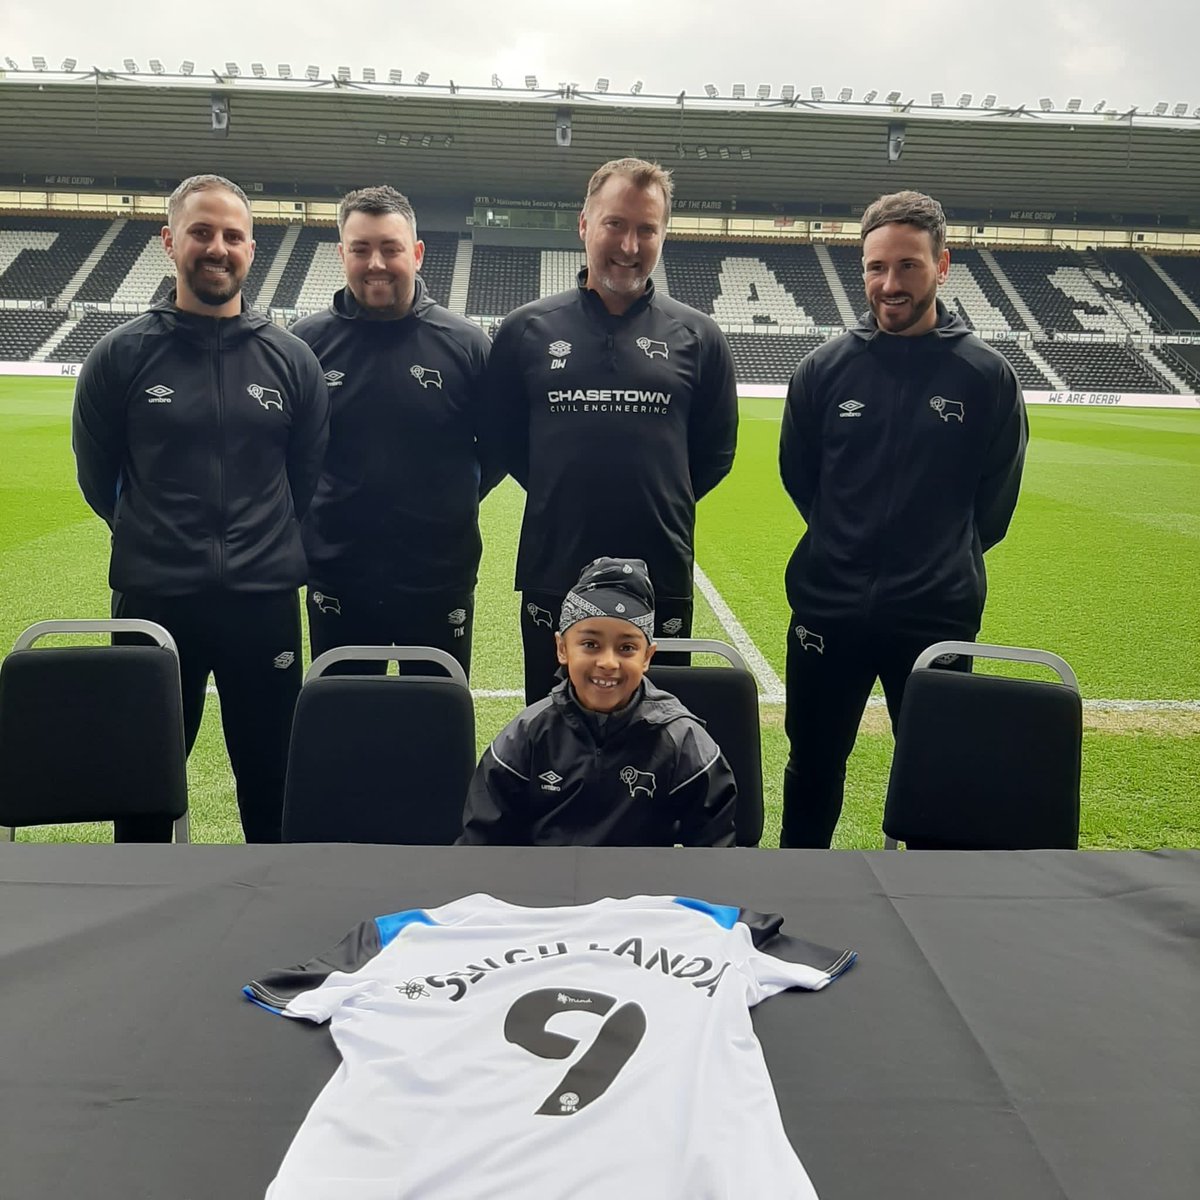 Meet Manroop Singh Landa a right wing forward who signed for the @dcfcacademy u9's yesterday.

Wish you all the best in your future at the club, we will be supporting you! 🐏

@dcfcofficial 

#SouthAsiansInFootball
#dcfc
#dcfcfans